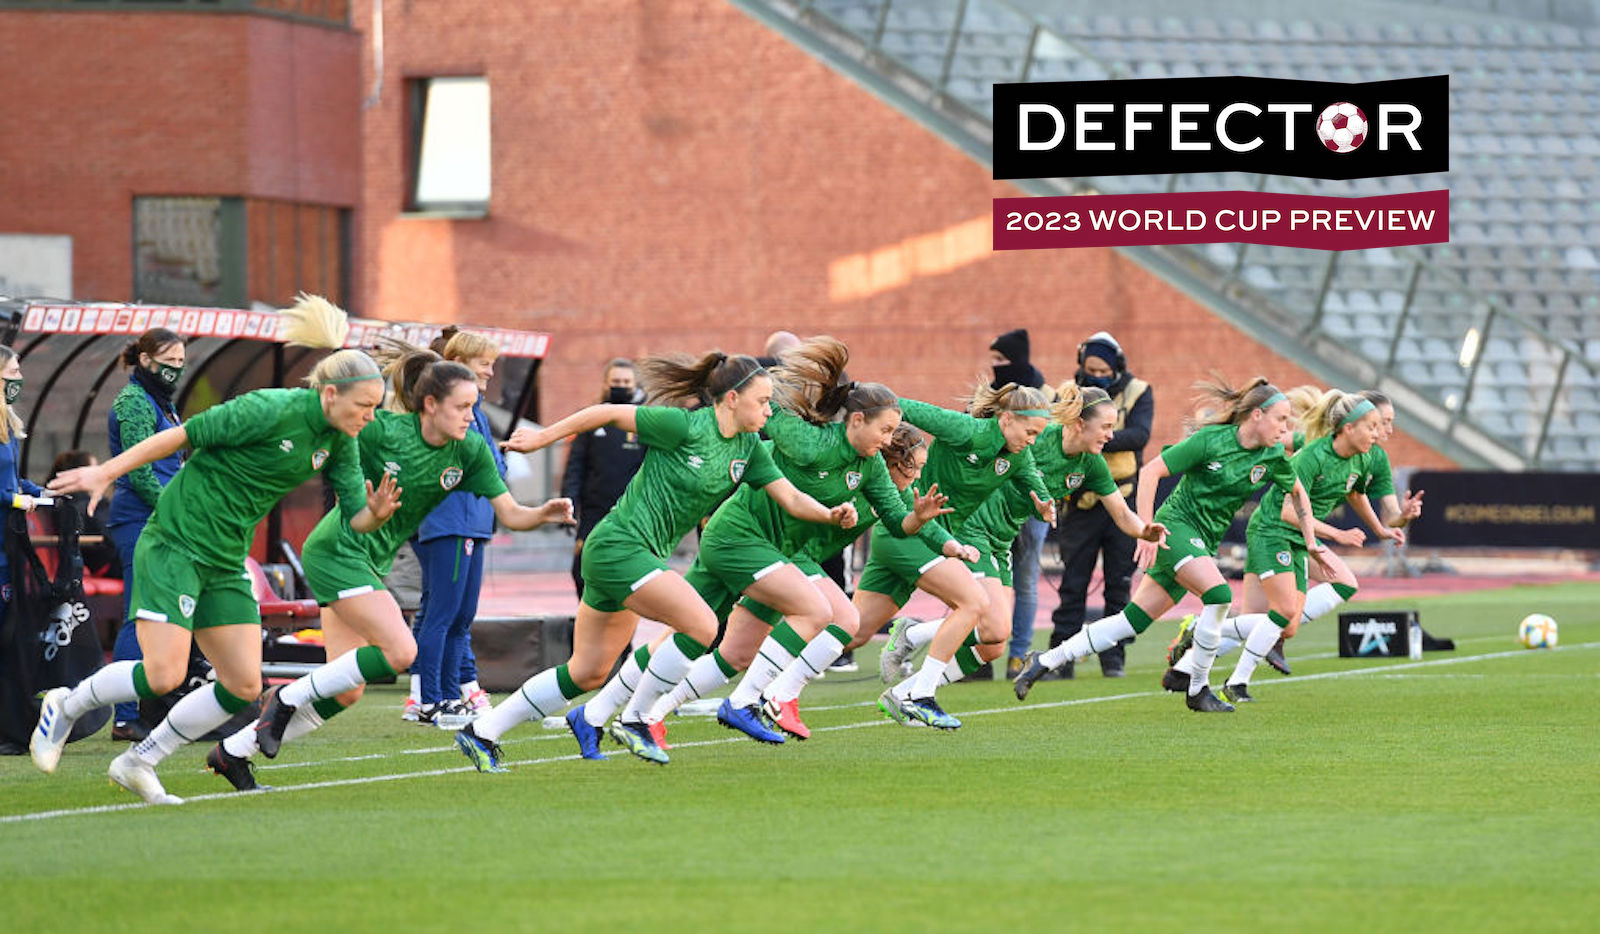 Irish players pictured at the warm up on the field ahead of a friendly women's soccer game between Belgium's national team the Red Flames and the Republic of Ireland, Sunday 11 April 2021 in Brussels. BELGA PHOTO DAVID CATRY (